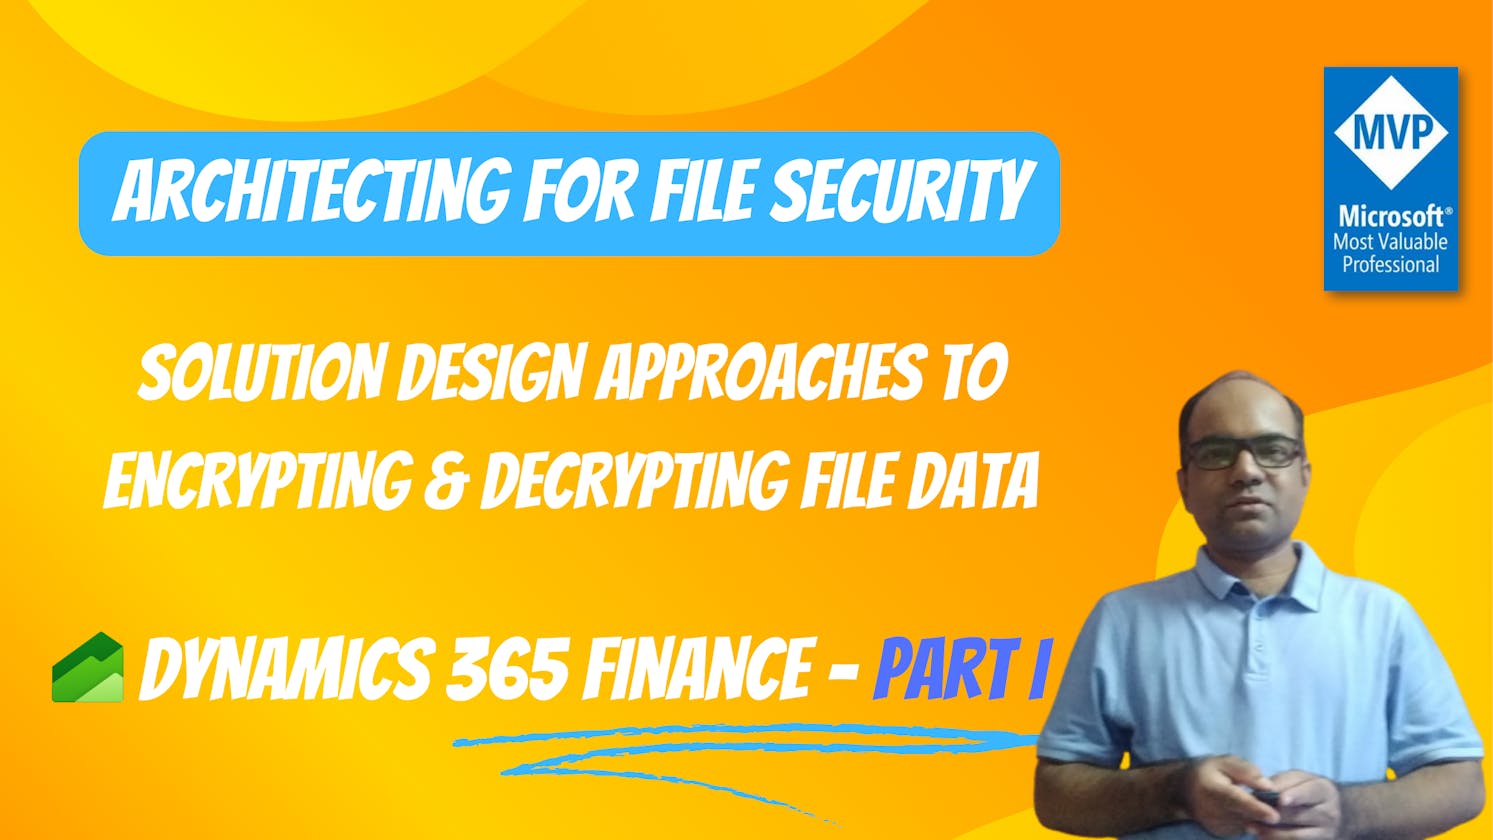 Architecting For File Security : Solution Design Approaches to Encrypting and Decrypting File Data in Dynamics 365 Finance - Part I